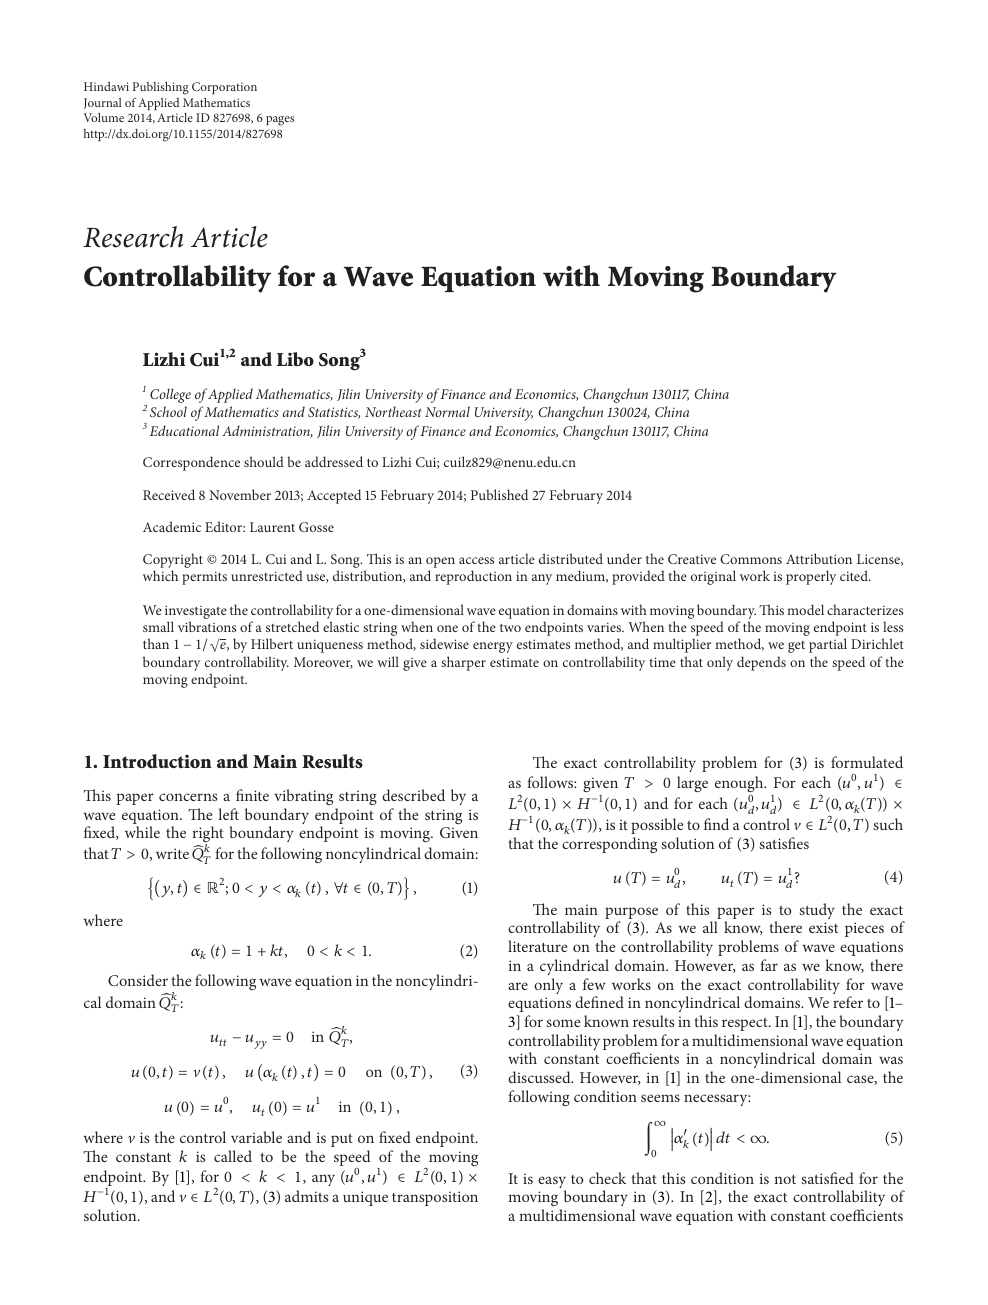 Controllability For A Wave Equation With Moving Boundary Topic Of Research Paper In Mathematics Download Scholarly Article Pdf And Read For Free On Cyberleninka Open Science Hub